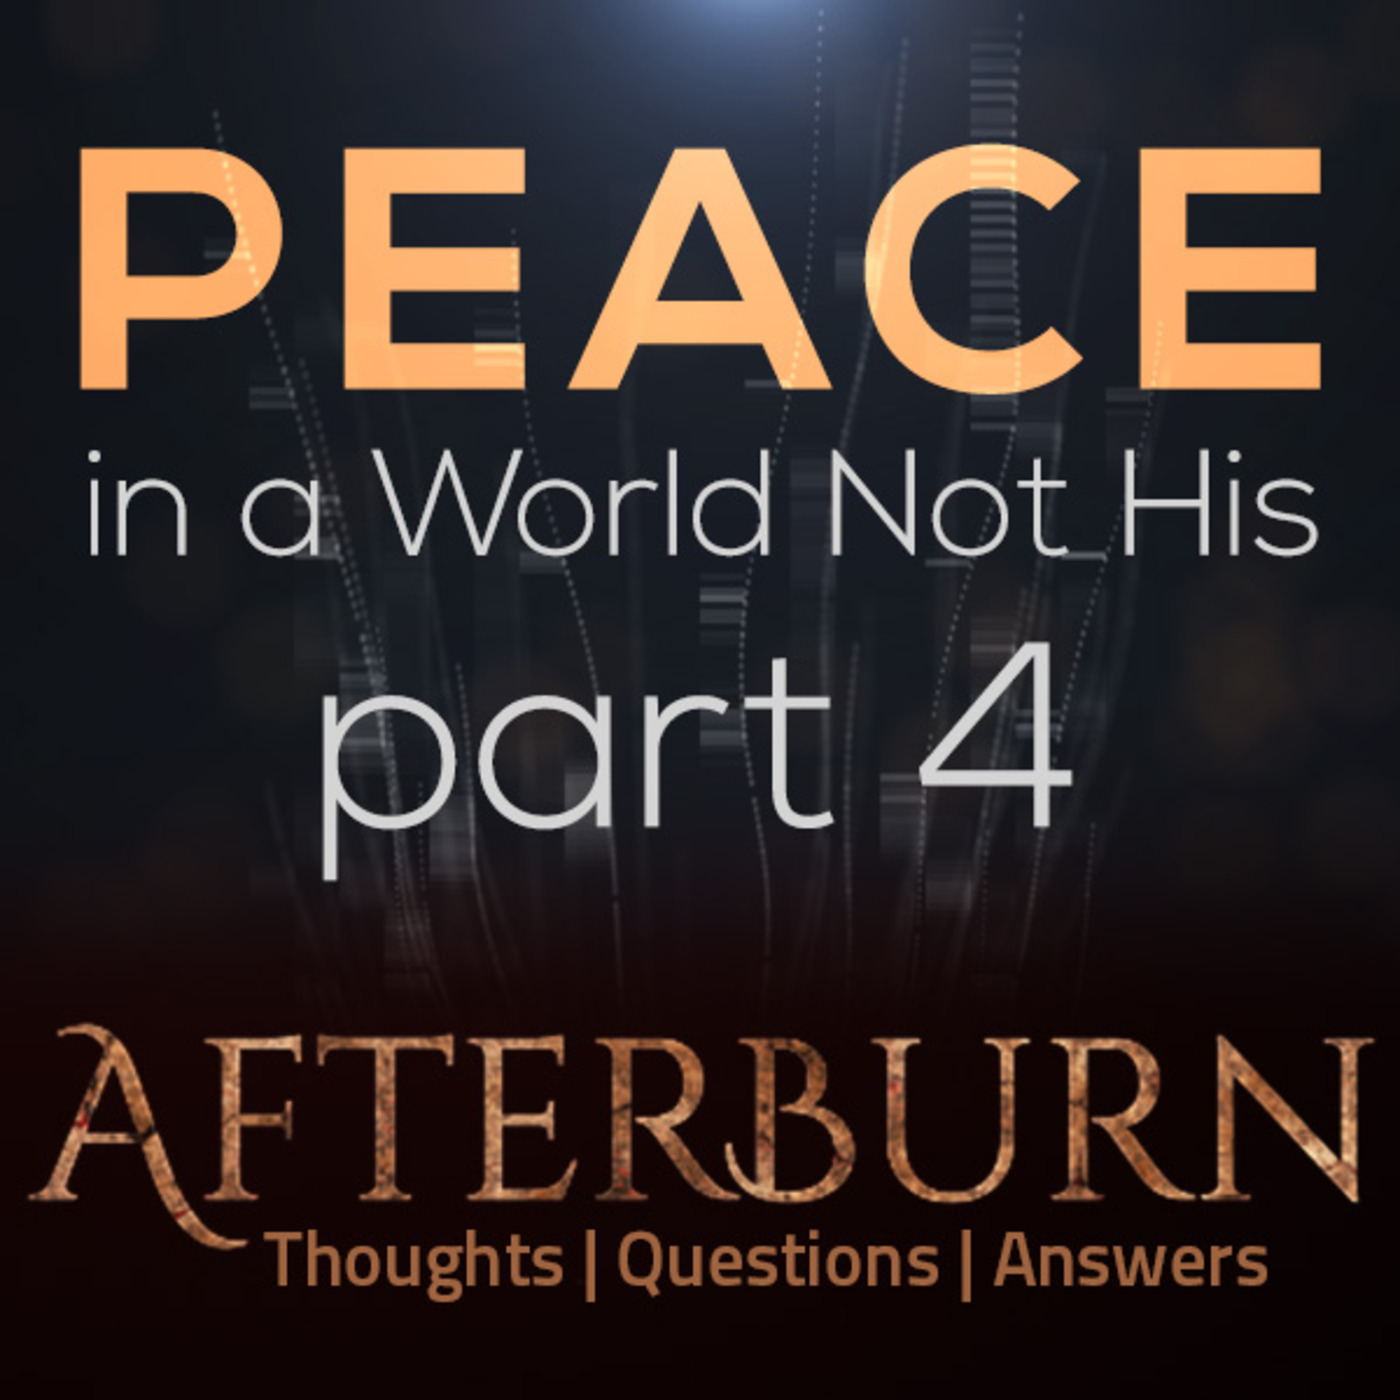 Afterburn: Thoughts, Q&A on Peace in a World Not His - Part 4